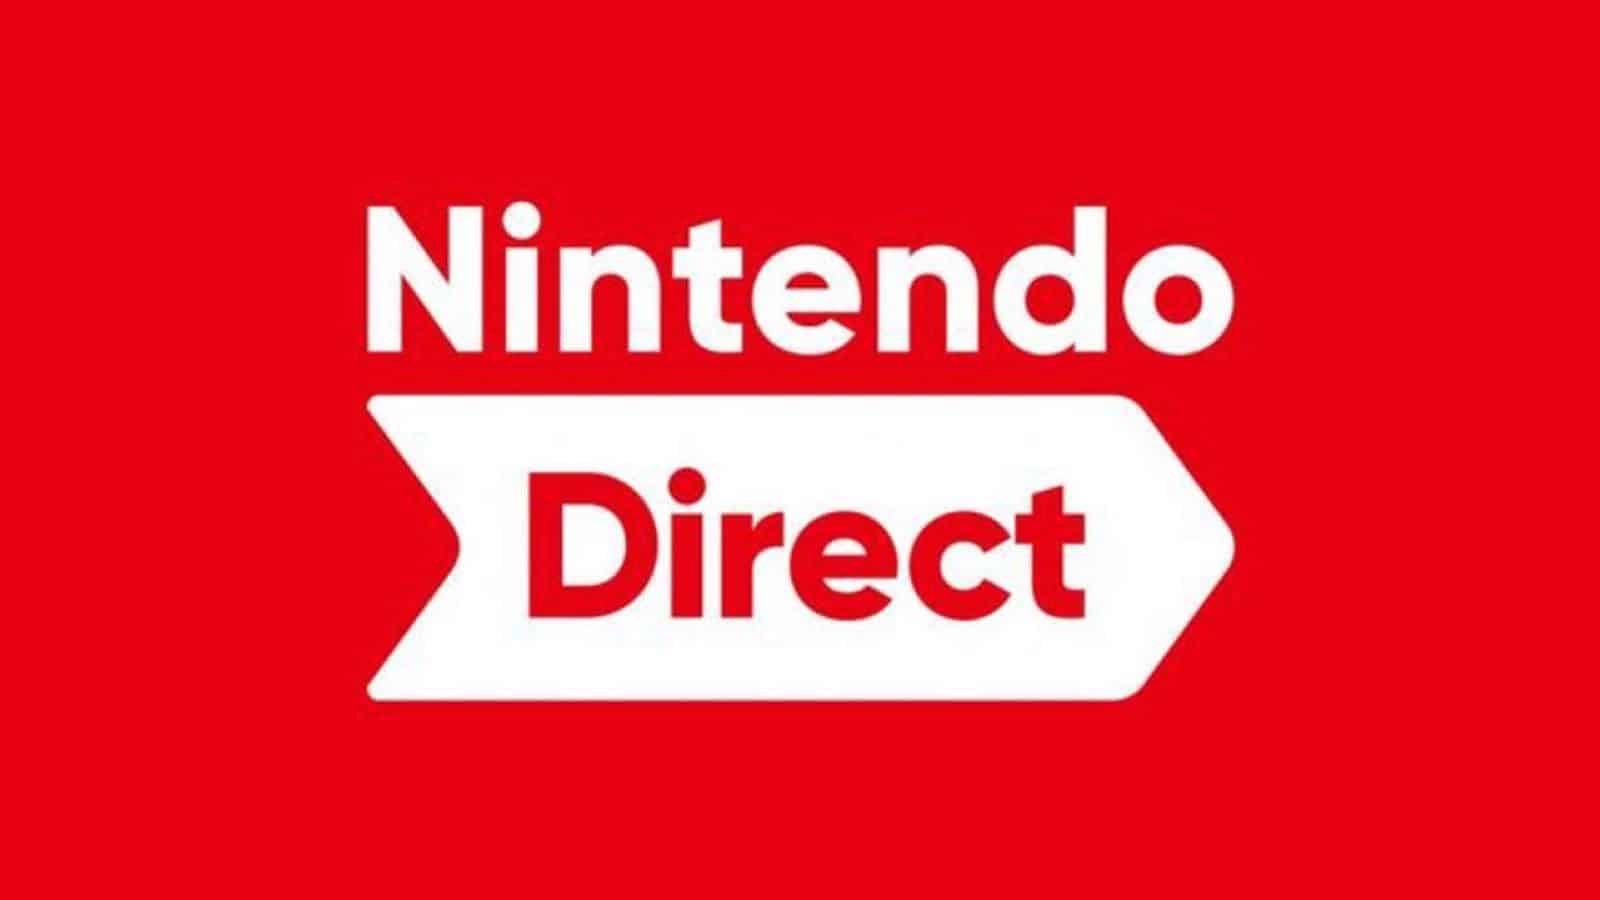 Nintendo Direct June 2023 Leaks – What to Expect? in 2023